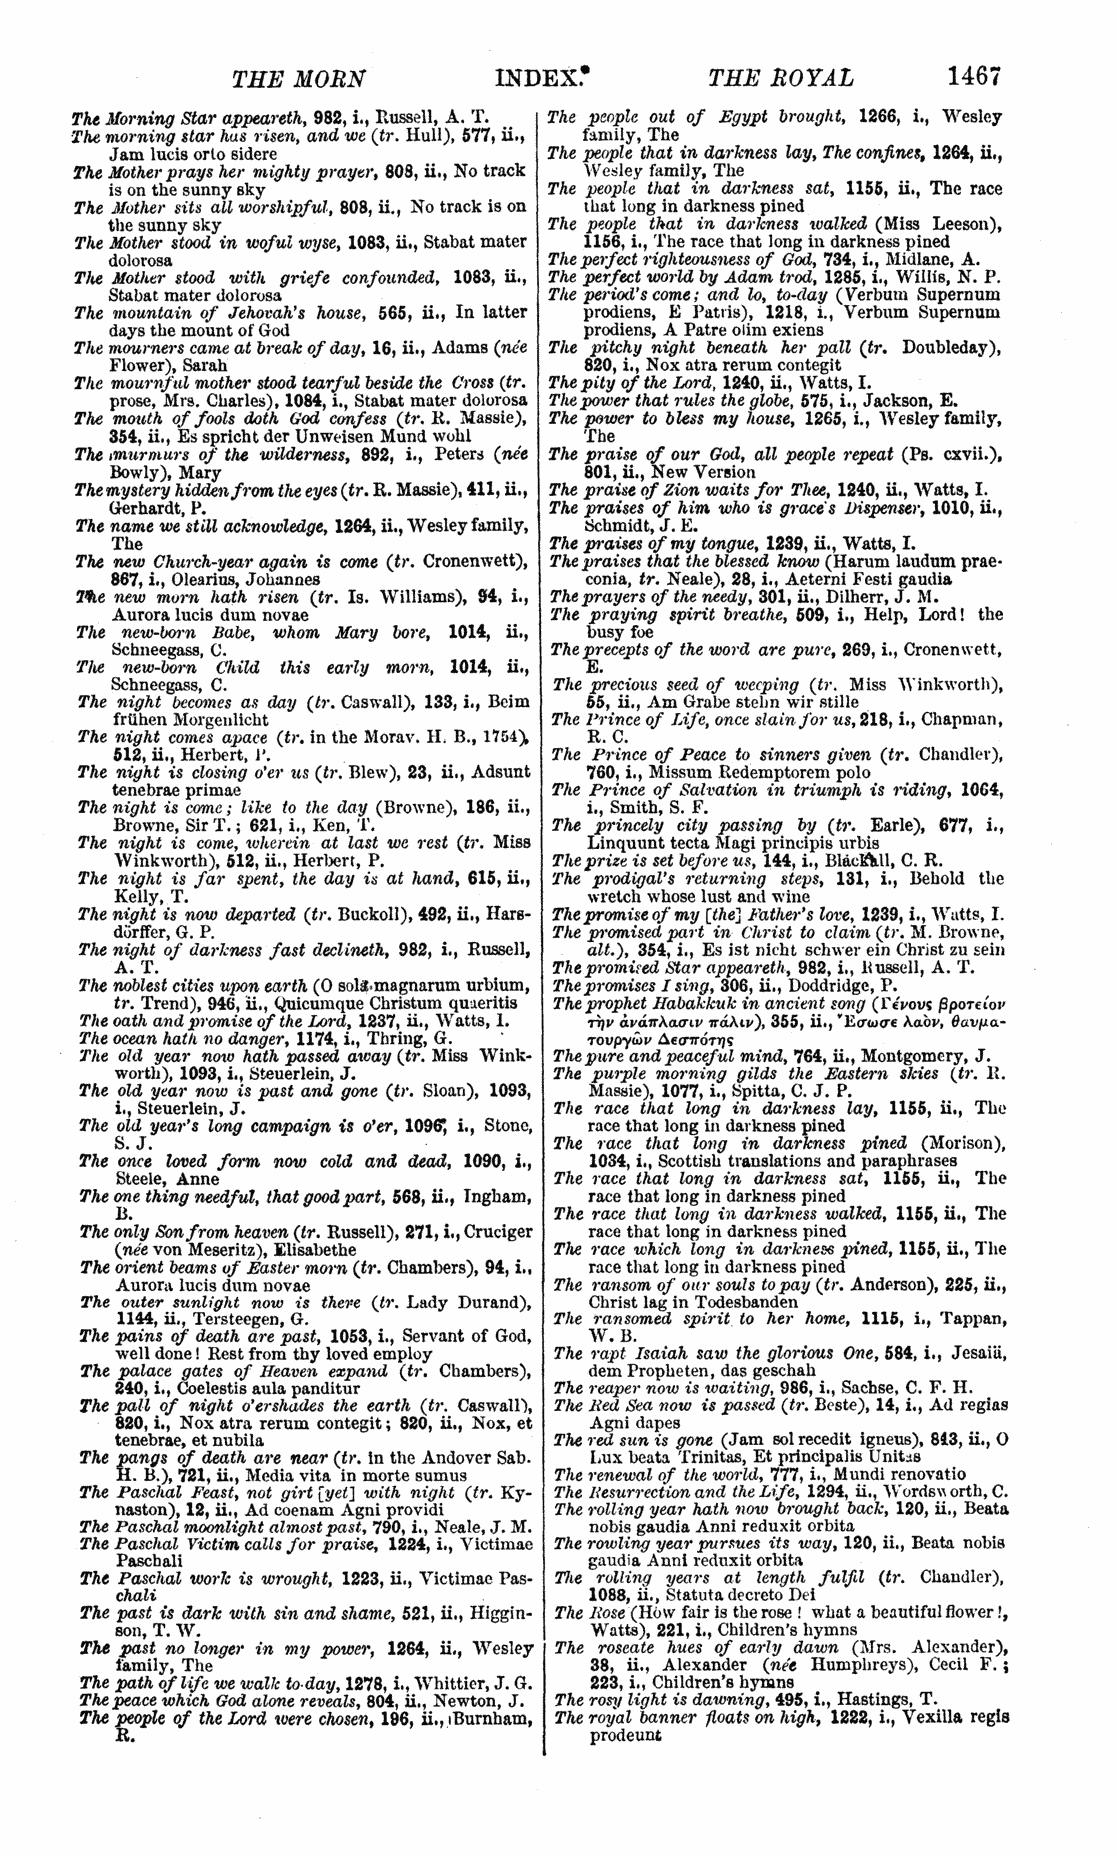 Image of page 1467